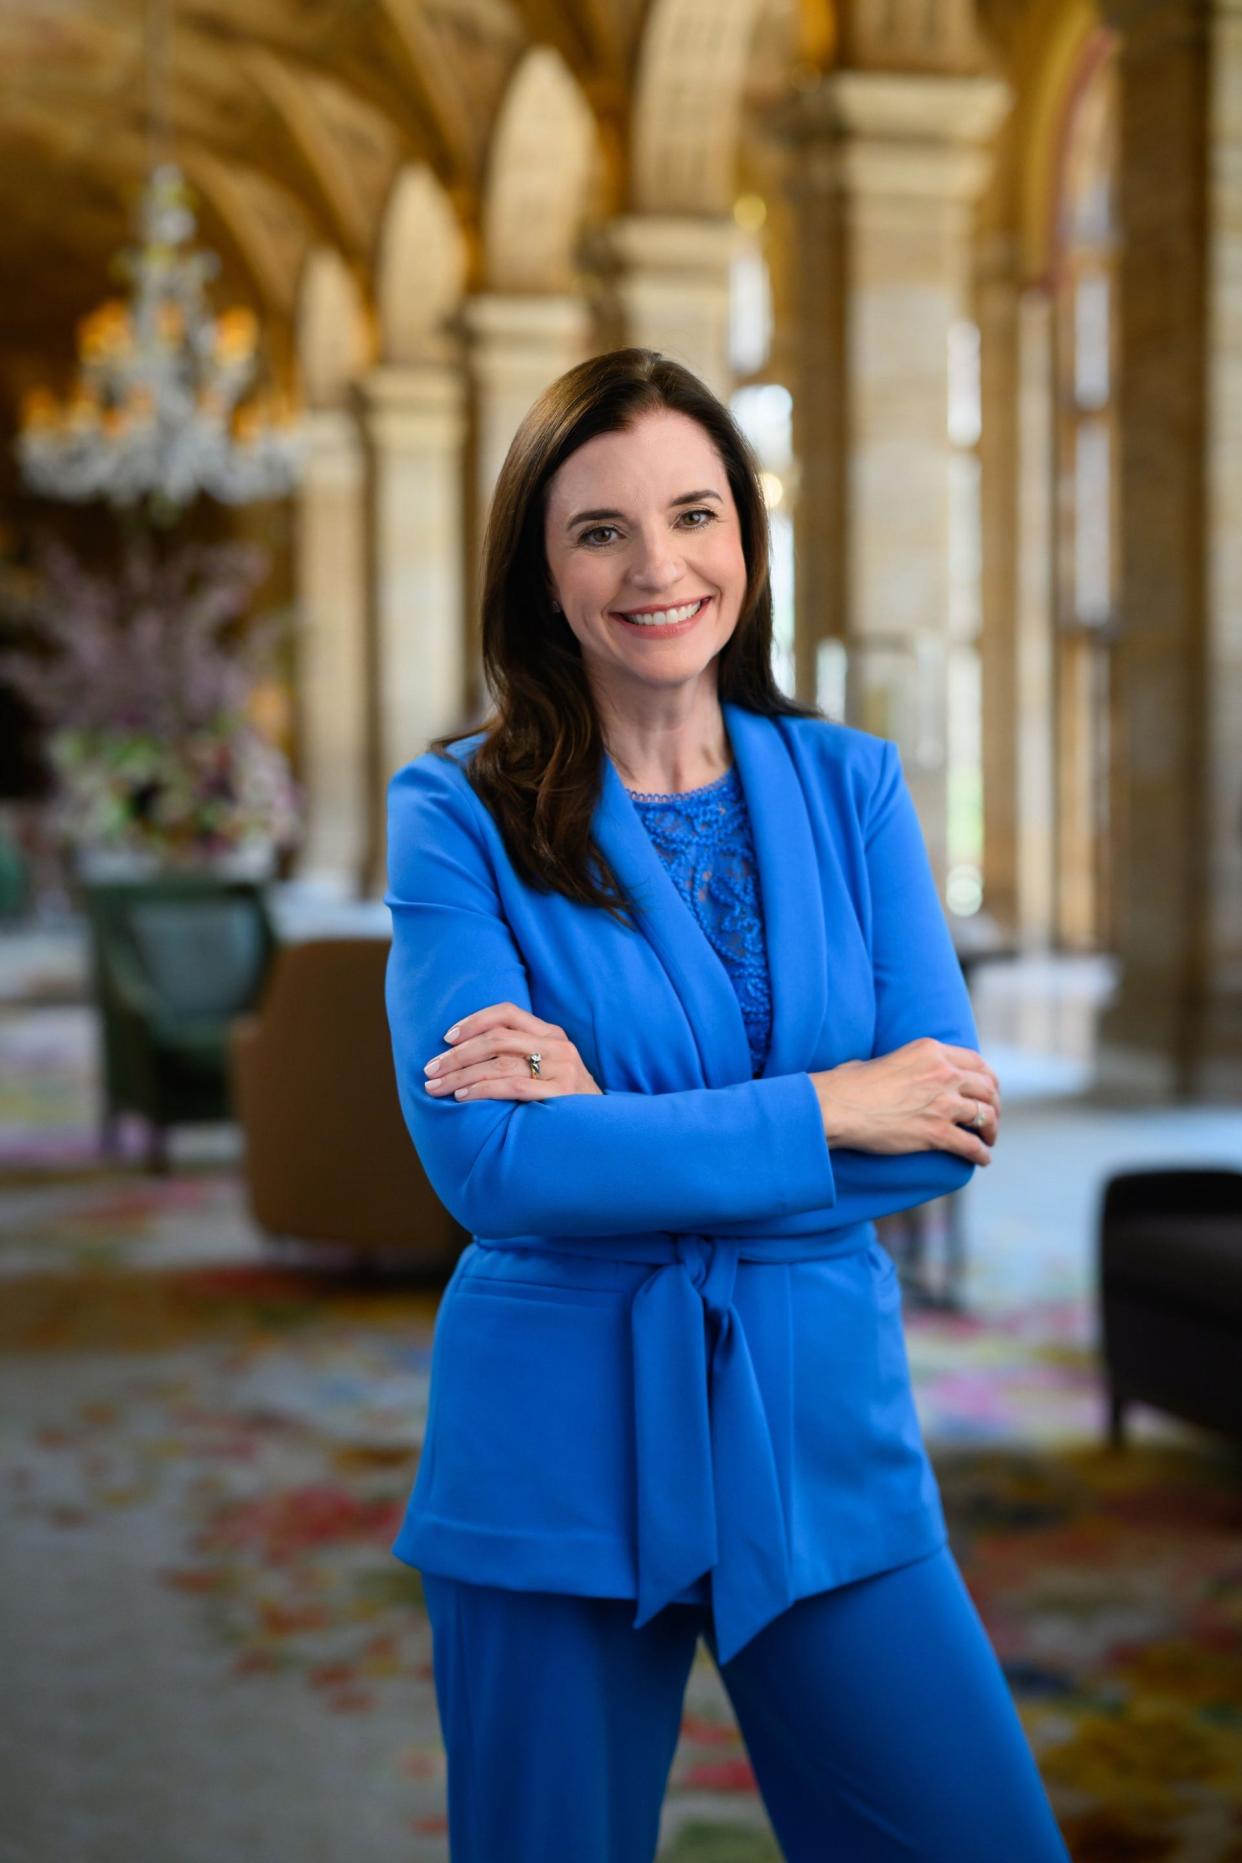 Tricia Taylor has been named president of The Breakers Palm Beach. She is the first woman in the resort's history to serve in that role.